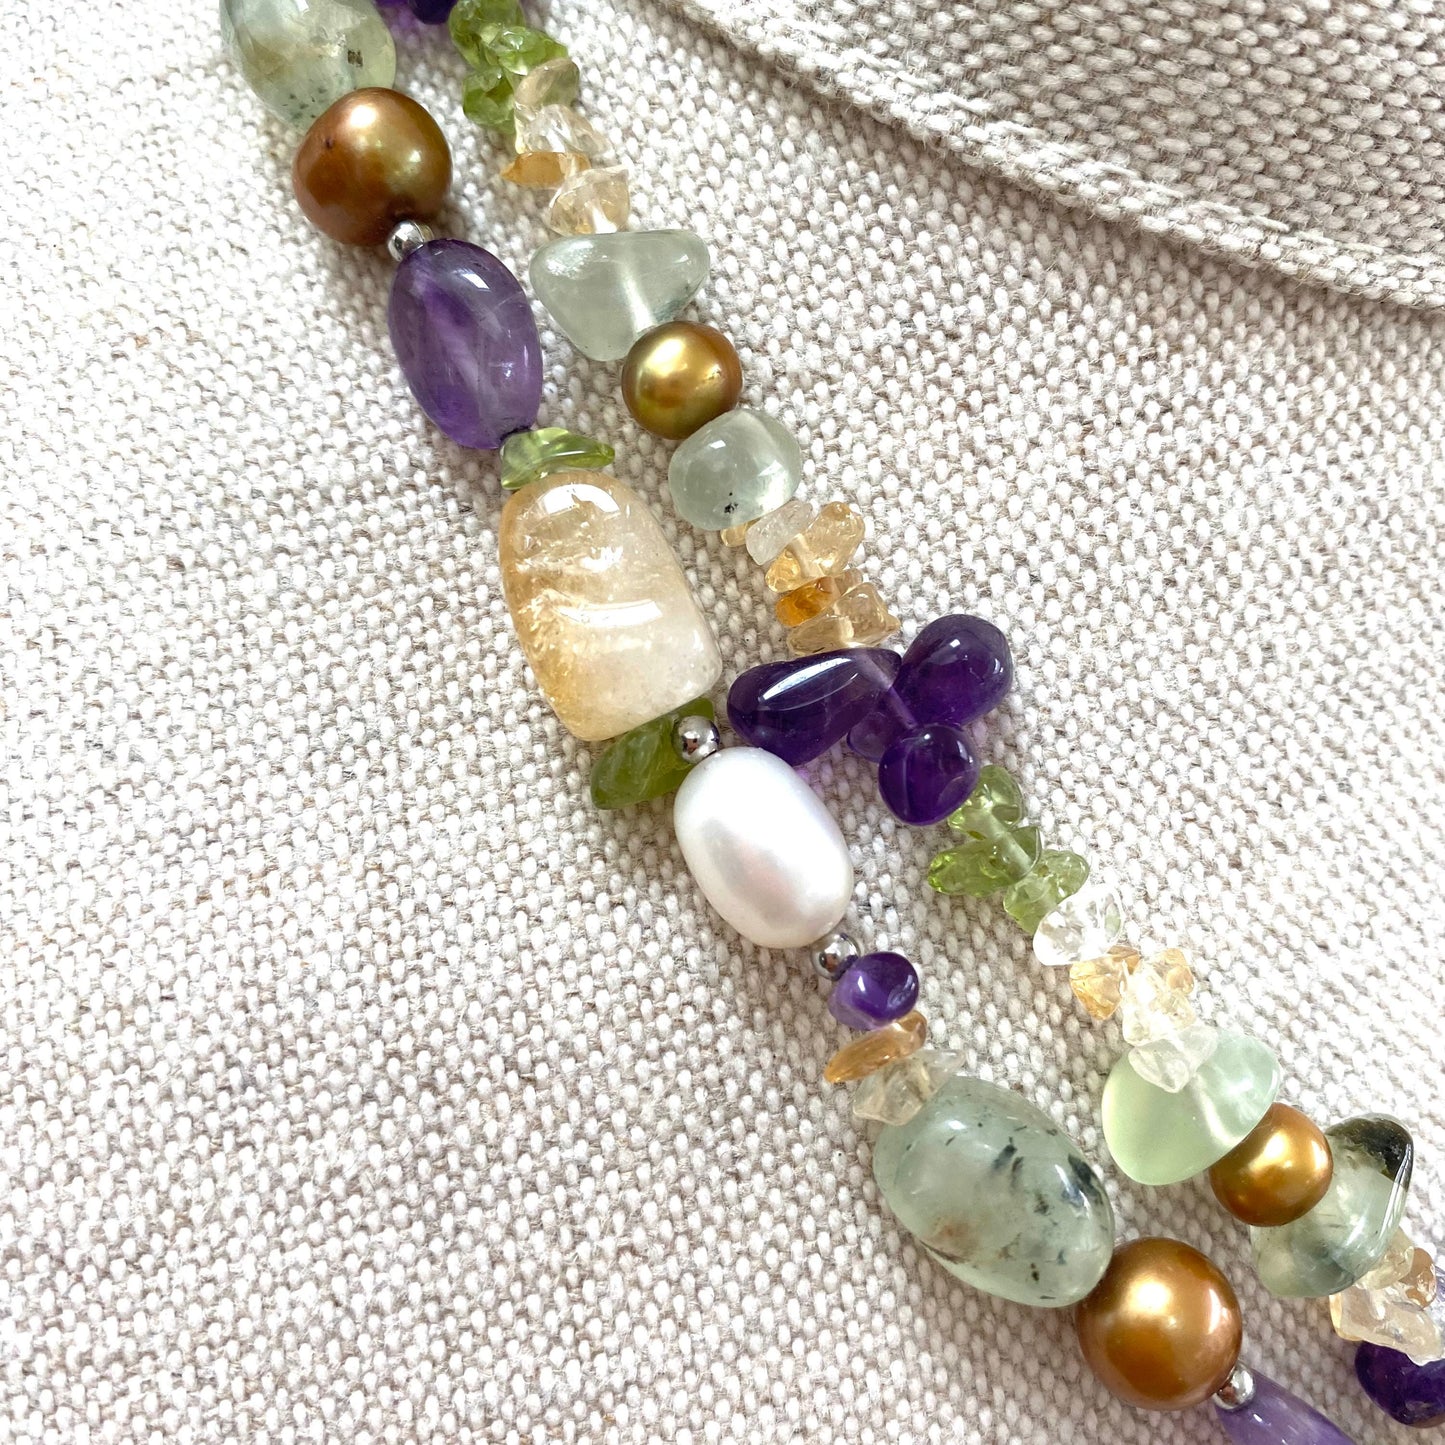 Vintage Tumbled Pebble Necklace Including Amethyst, Peridot, Rock Crystal and Fresh Water Cultured Pearls